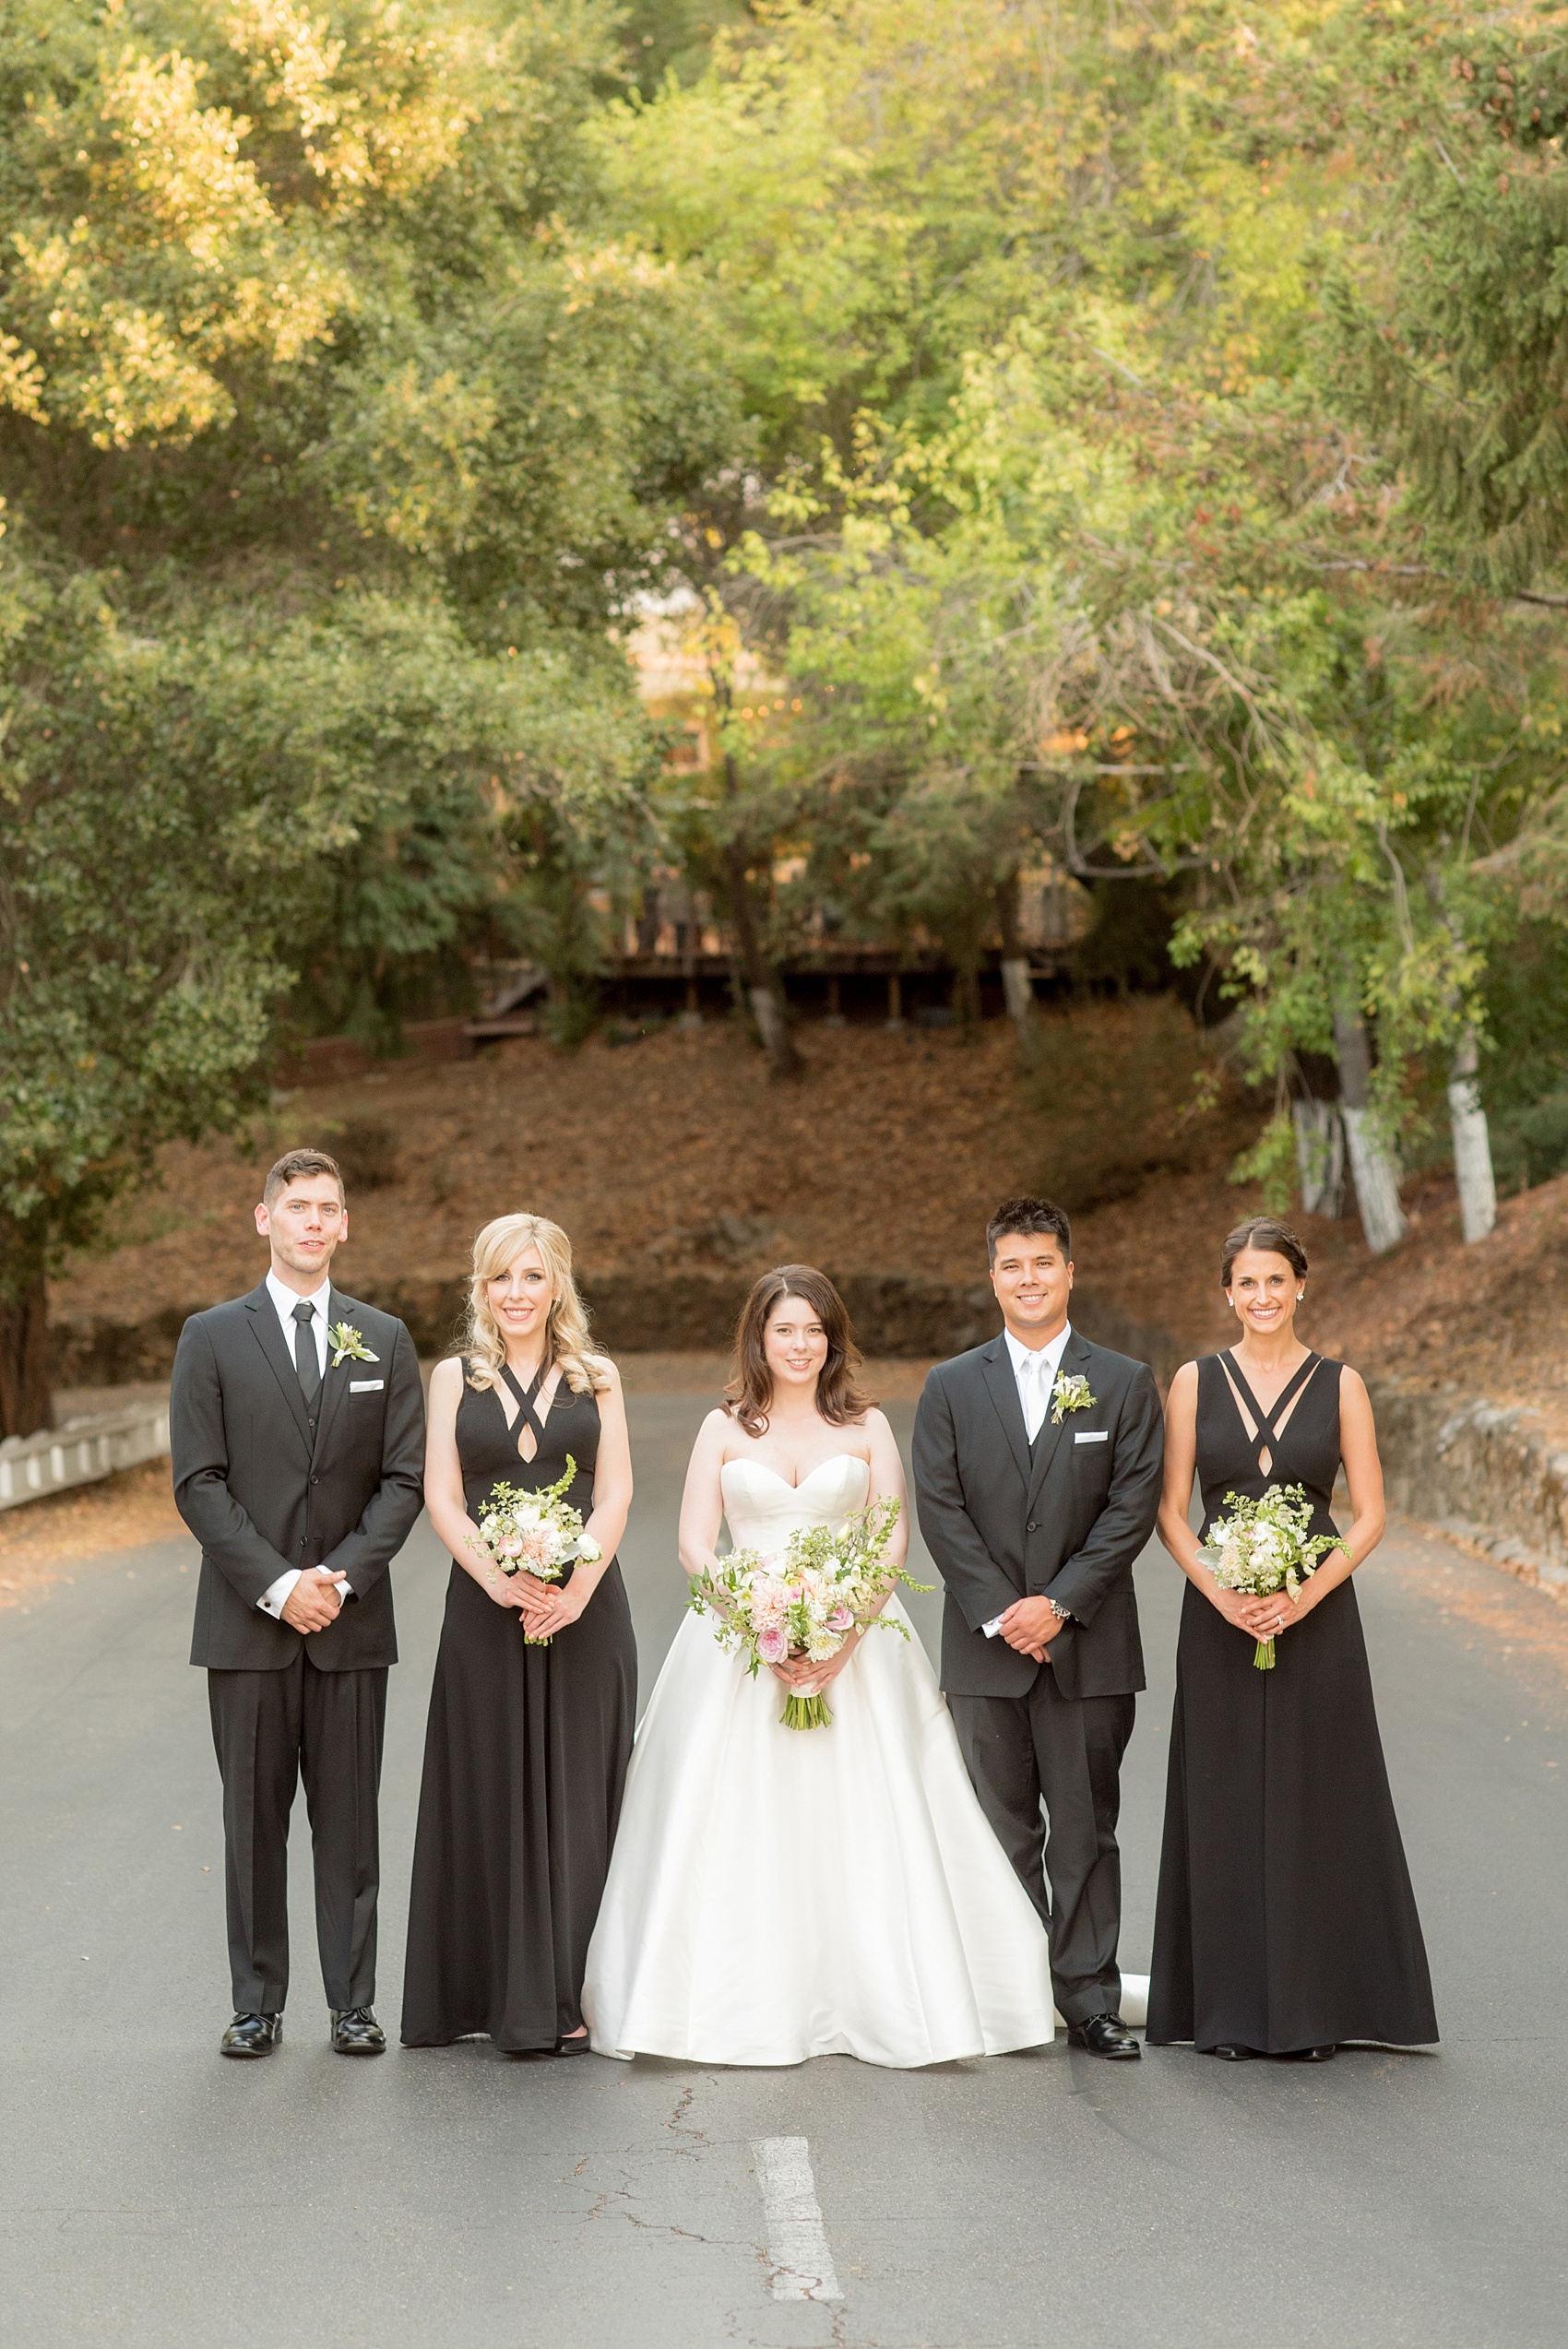 Mikkel Paige Photography Vogue photo of the bride and her bridal party at a Testarossa Winery wedding in Los Gatos, California.